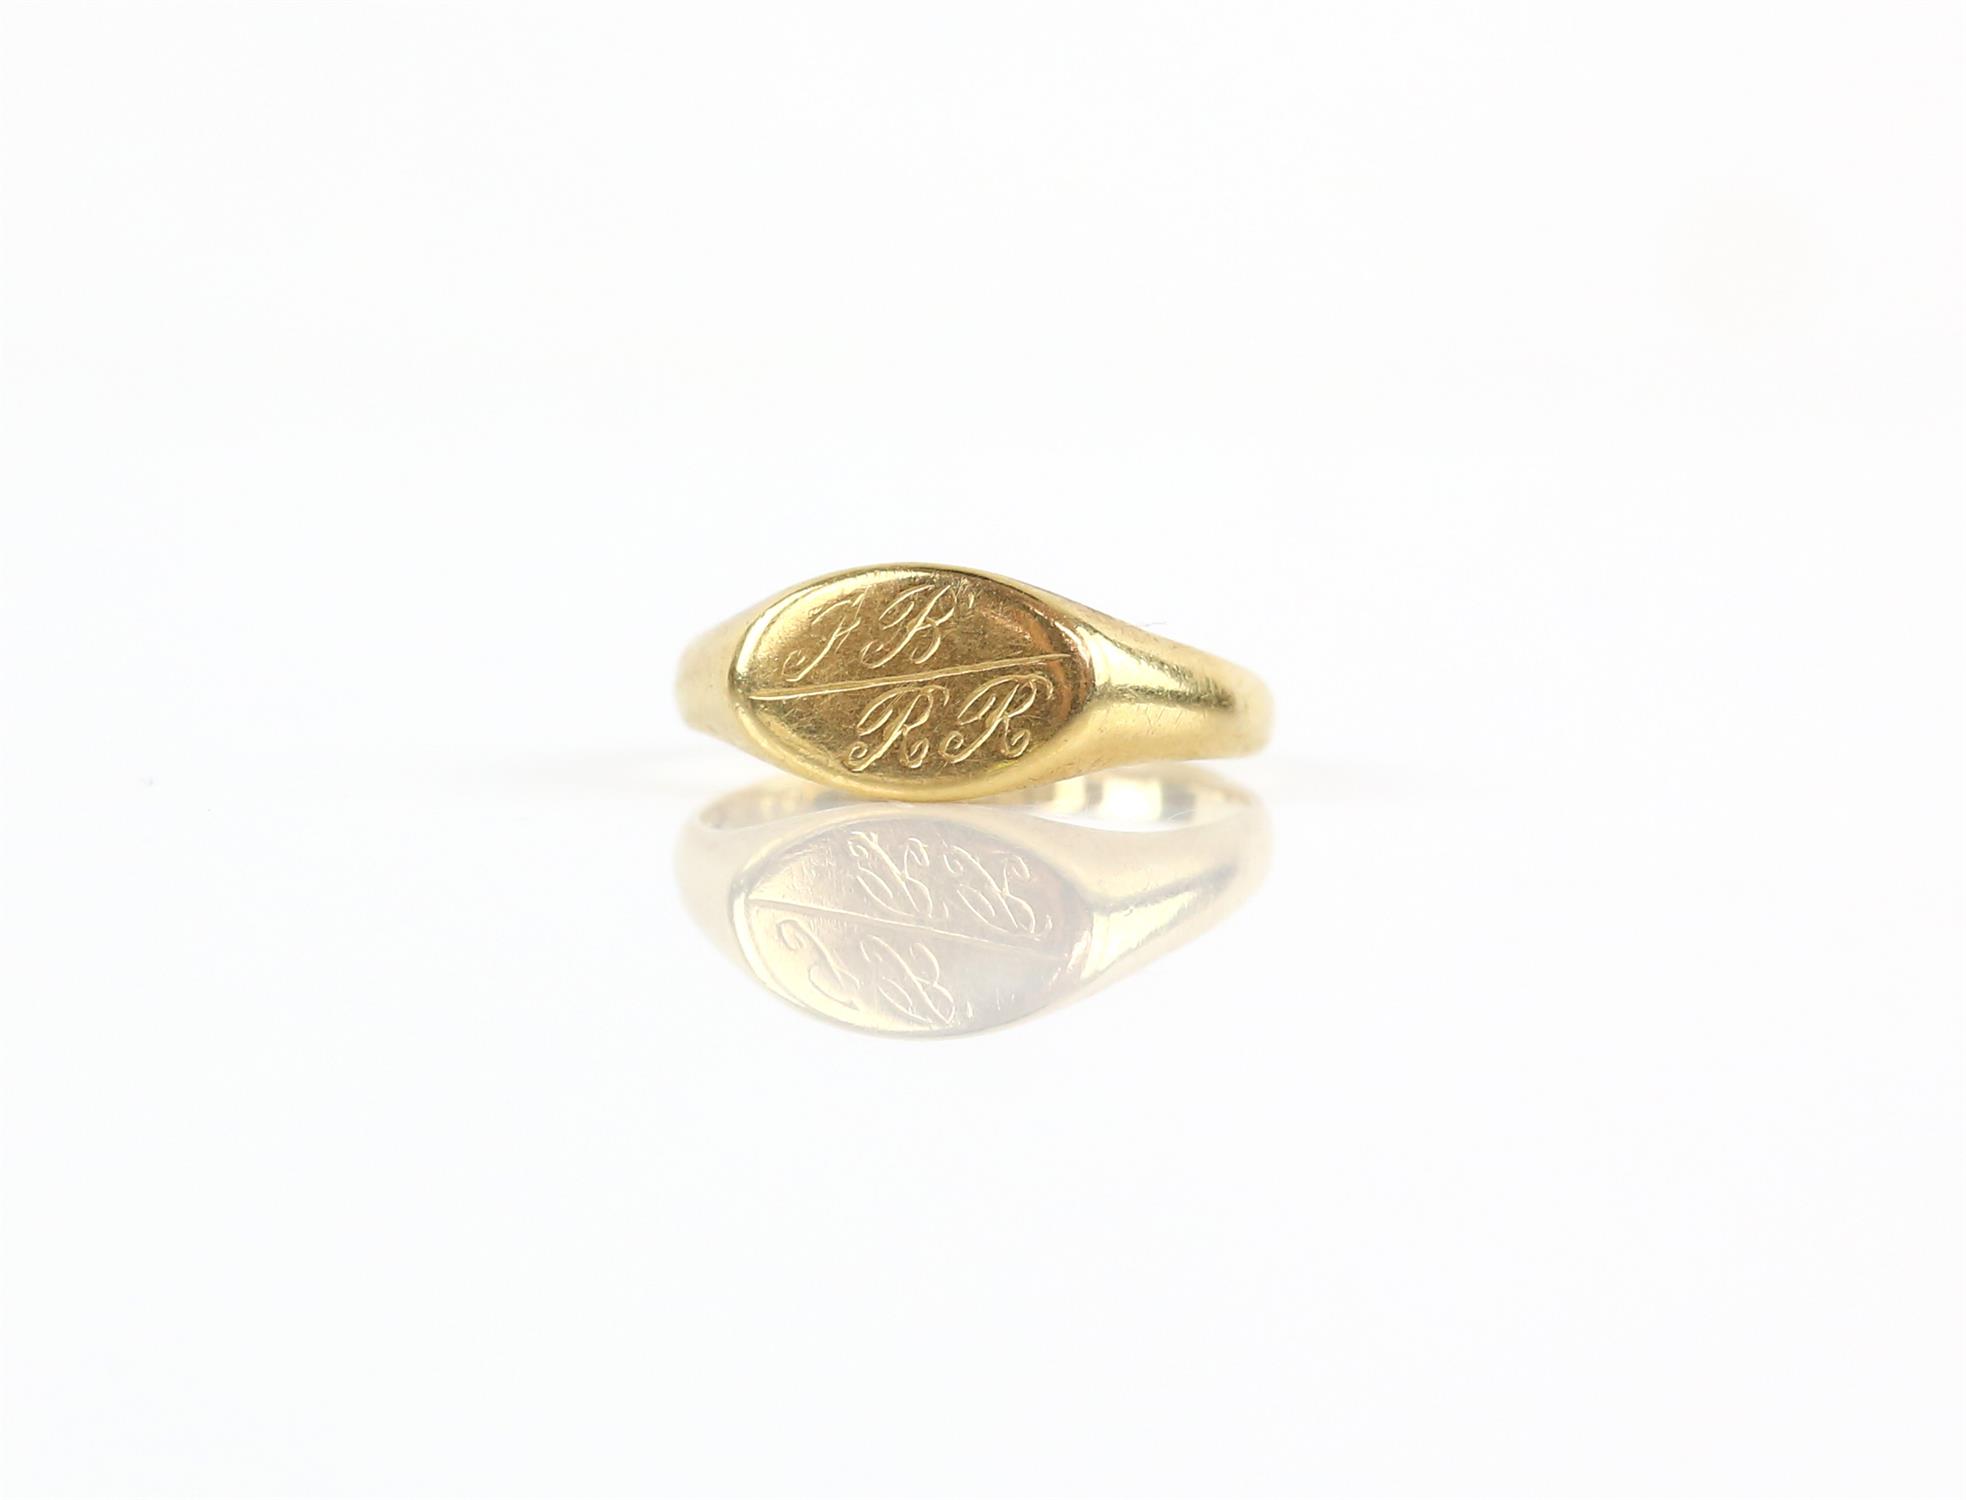 Signet ring, with an oval monogram plaque, with the initials JB / RR, in 18ct, hallmarked London